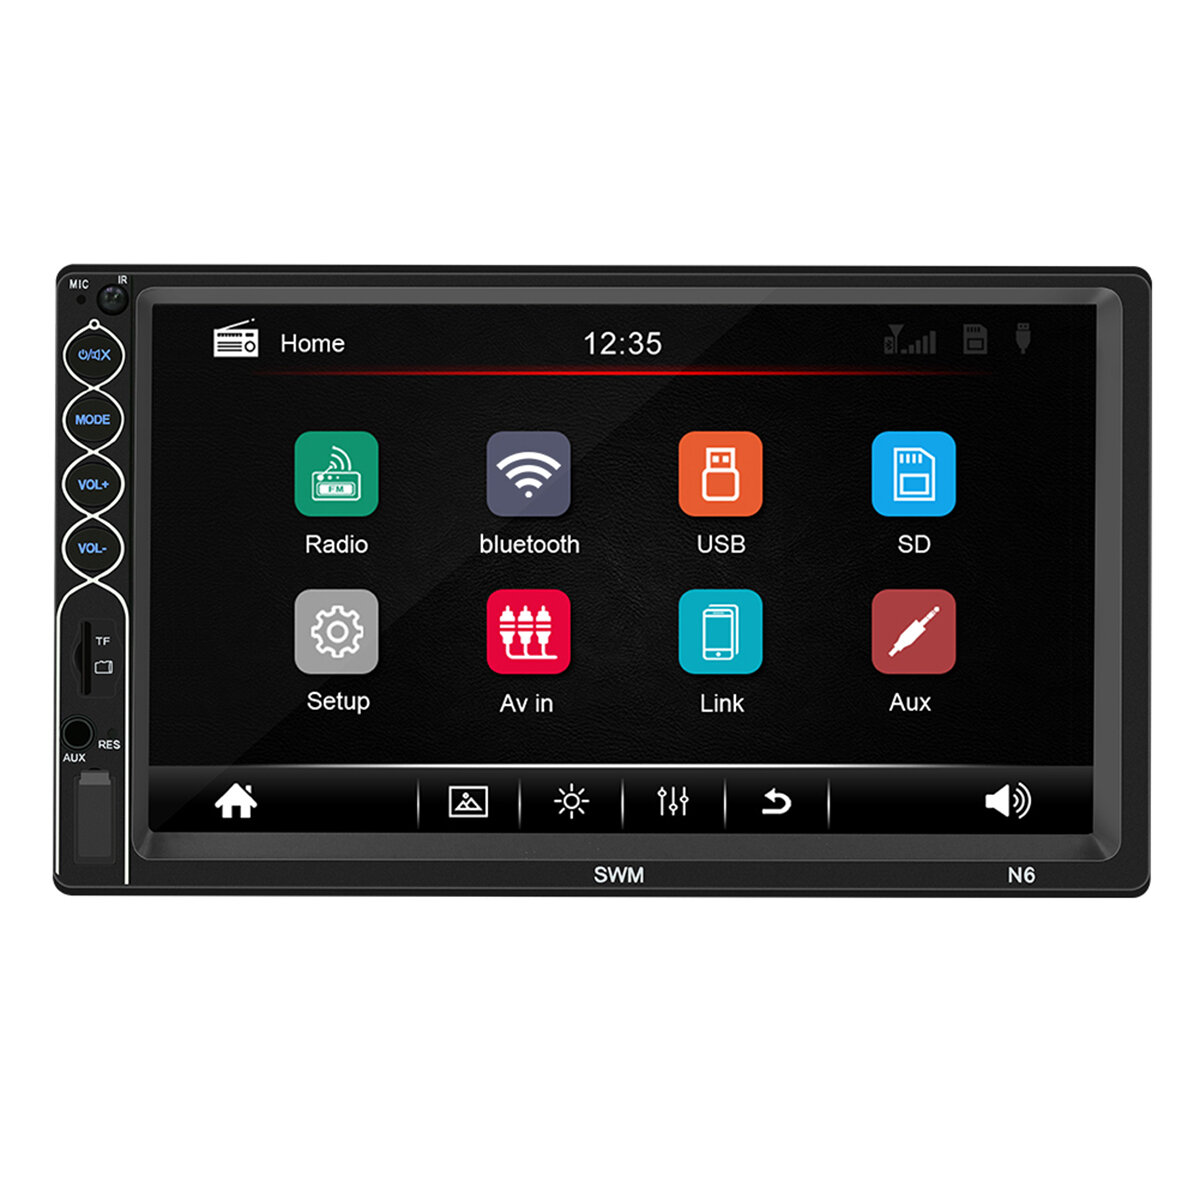 

N6 7 Inch 2 Din Wince Car Radio Stereo MP5 Player 1+16G bluetooth GPS Touch Screen HD NAV FM AUX USB Support Mobile Inte